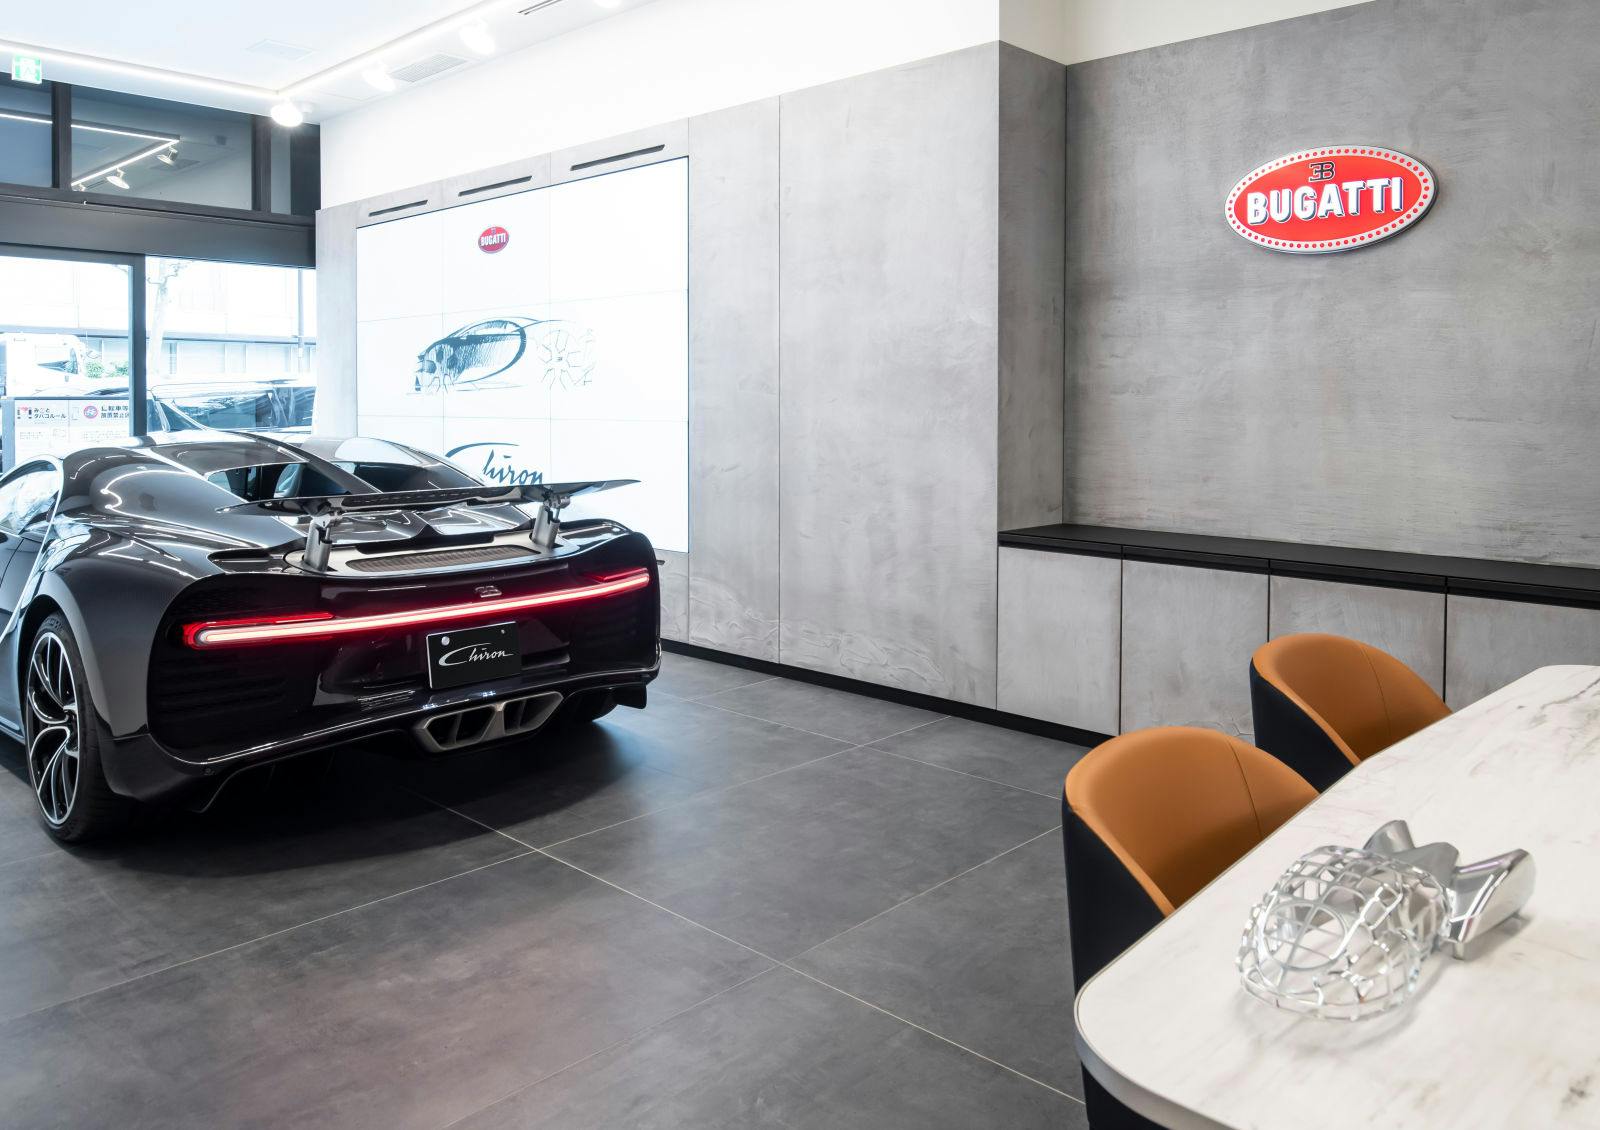 A special opening: the Bugatti Tokyo showroom opens its doors shortly after the legendary Bugatti Chiron is homologated in Japan.